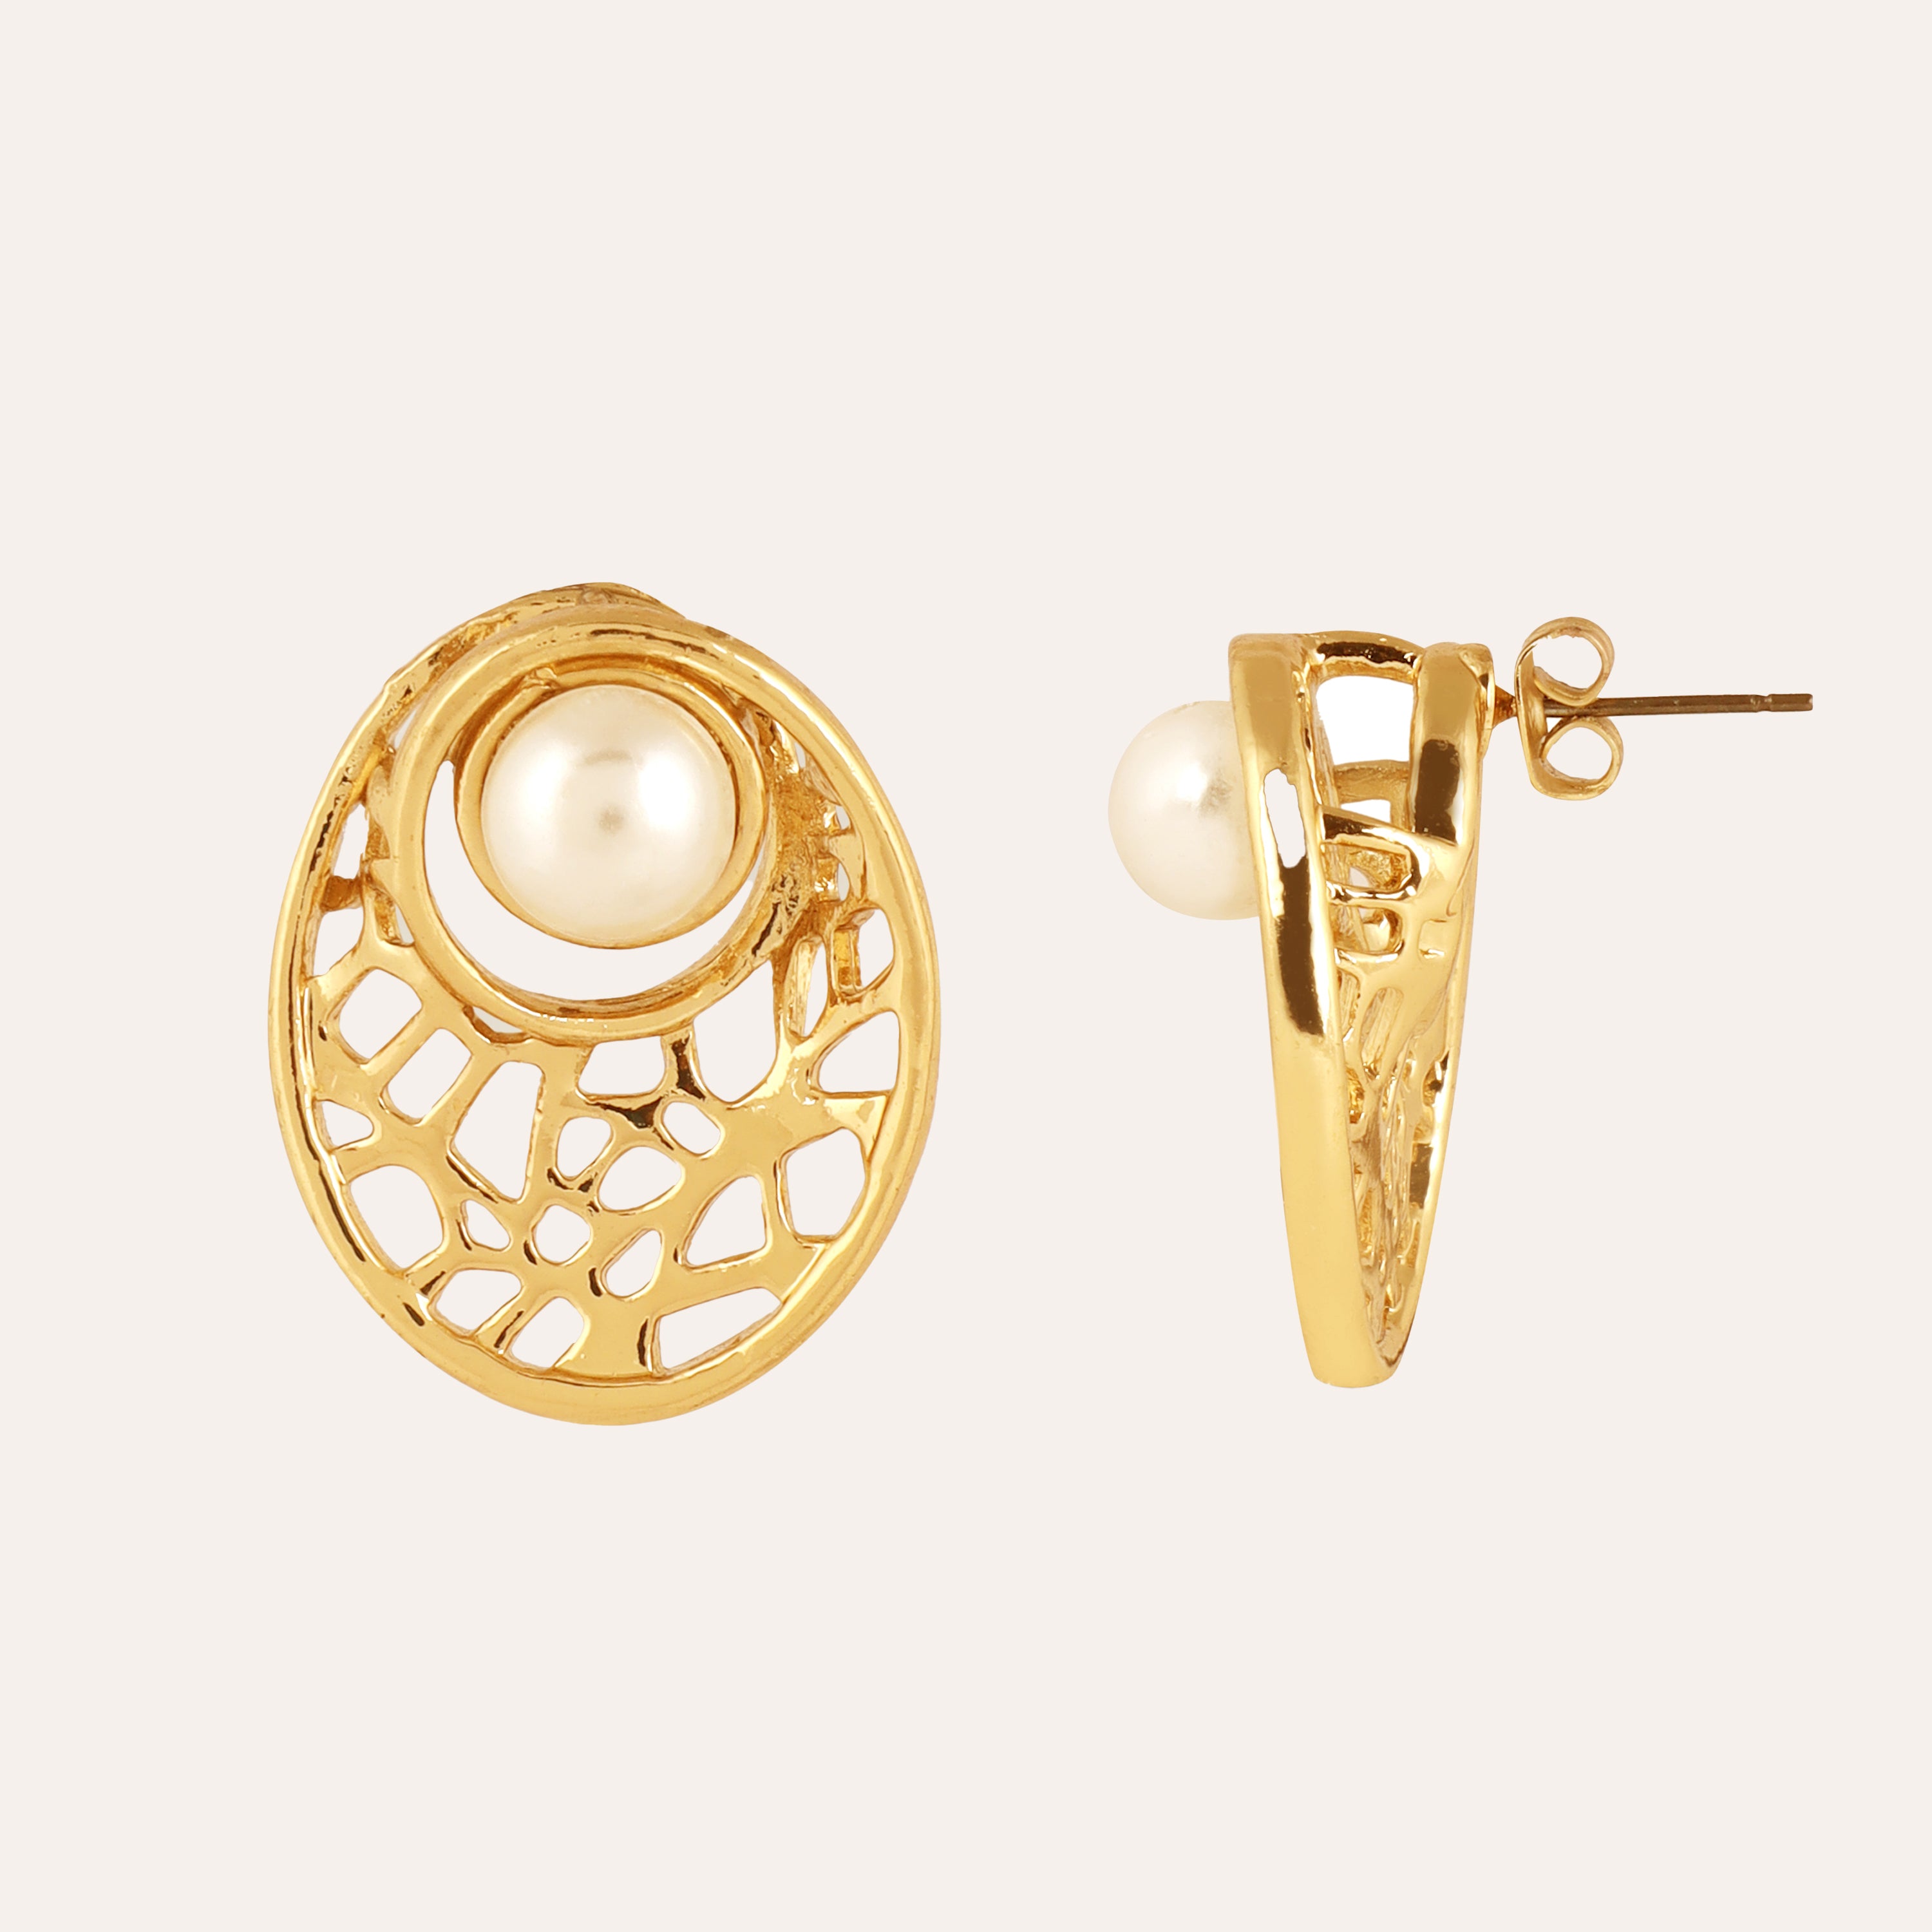 Share more than 223 casual wear gold earrings super hot